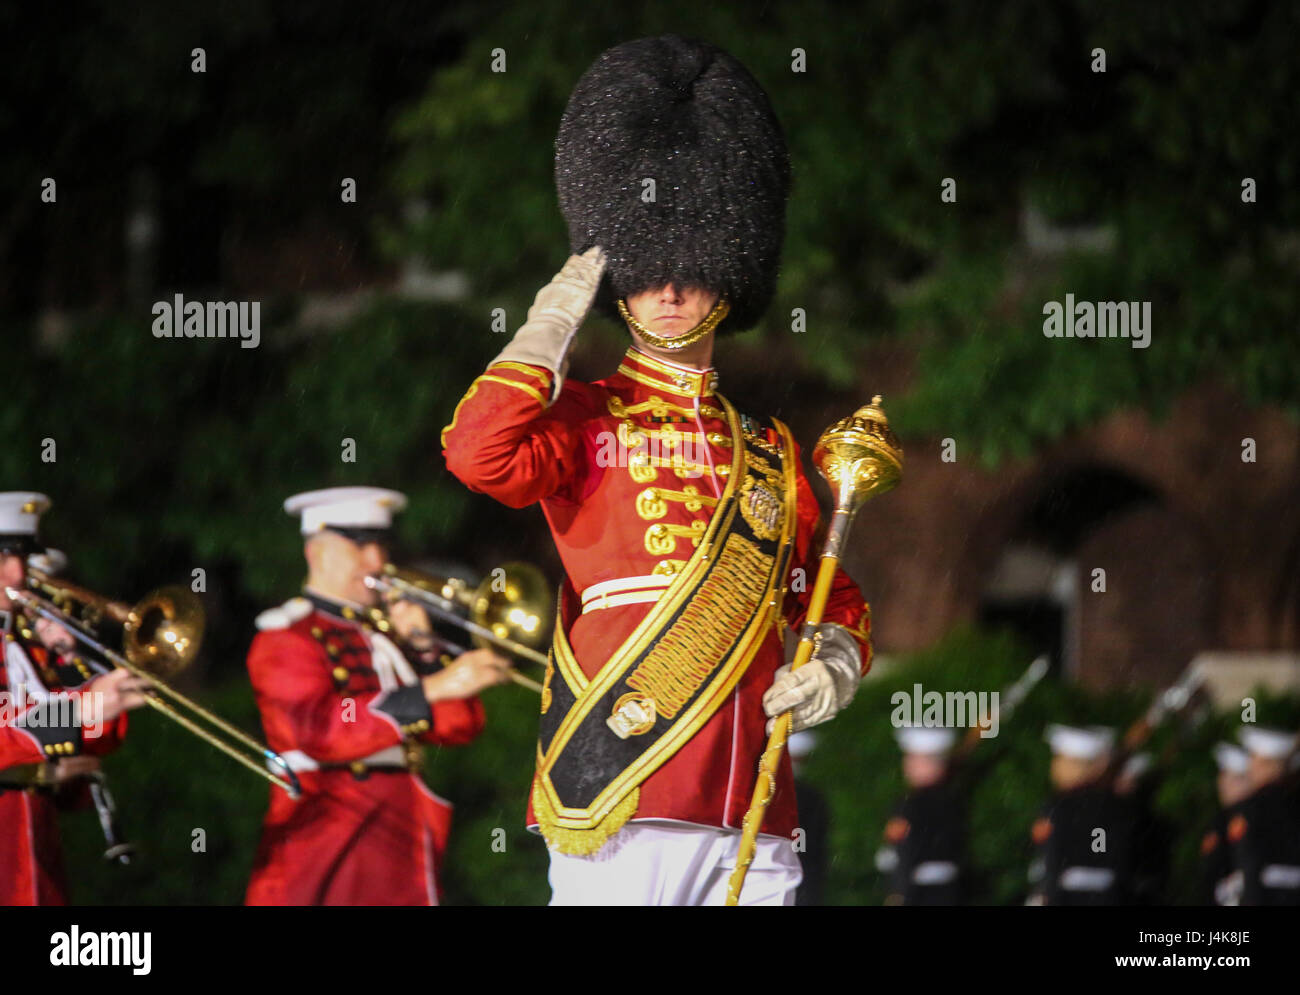 Master Sgt. Duane King, drum major, “The President’s Own”U.S. Marine Corps Band, salutes the hosting official and guests of honor during a Friday Evening Parade at Marine Barracks Washington D.C., May 5, 2017. The guests of honor for the parade were the Honorable Paul Cook, California’s 8th Congressional District Congressman, the Honorable Jack Bergman, Michigan’s 1st Congressional District Congressman, and the Honorable Salud Carbajal, California’s 24th Congressional District Congressman. The hosting official was Gen. Glenn Walters, assistant commandant of the Marine Corps.(Official Marine Co Stock Photo